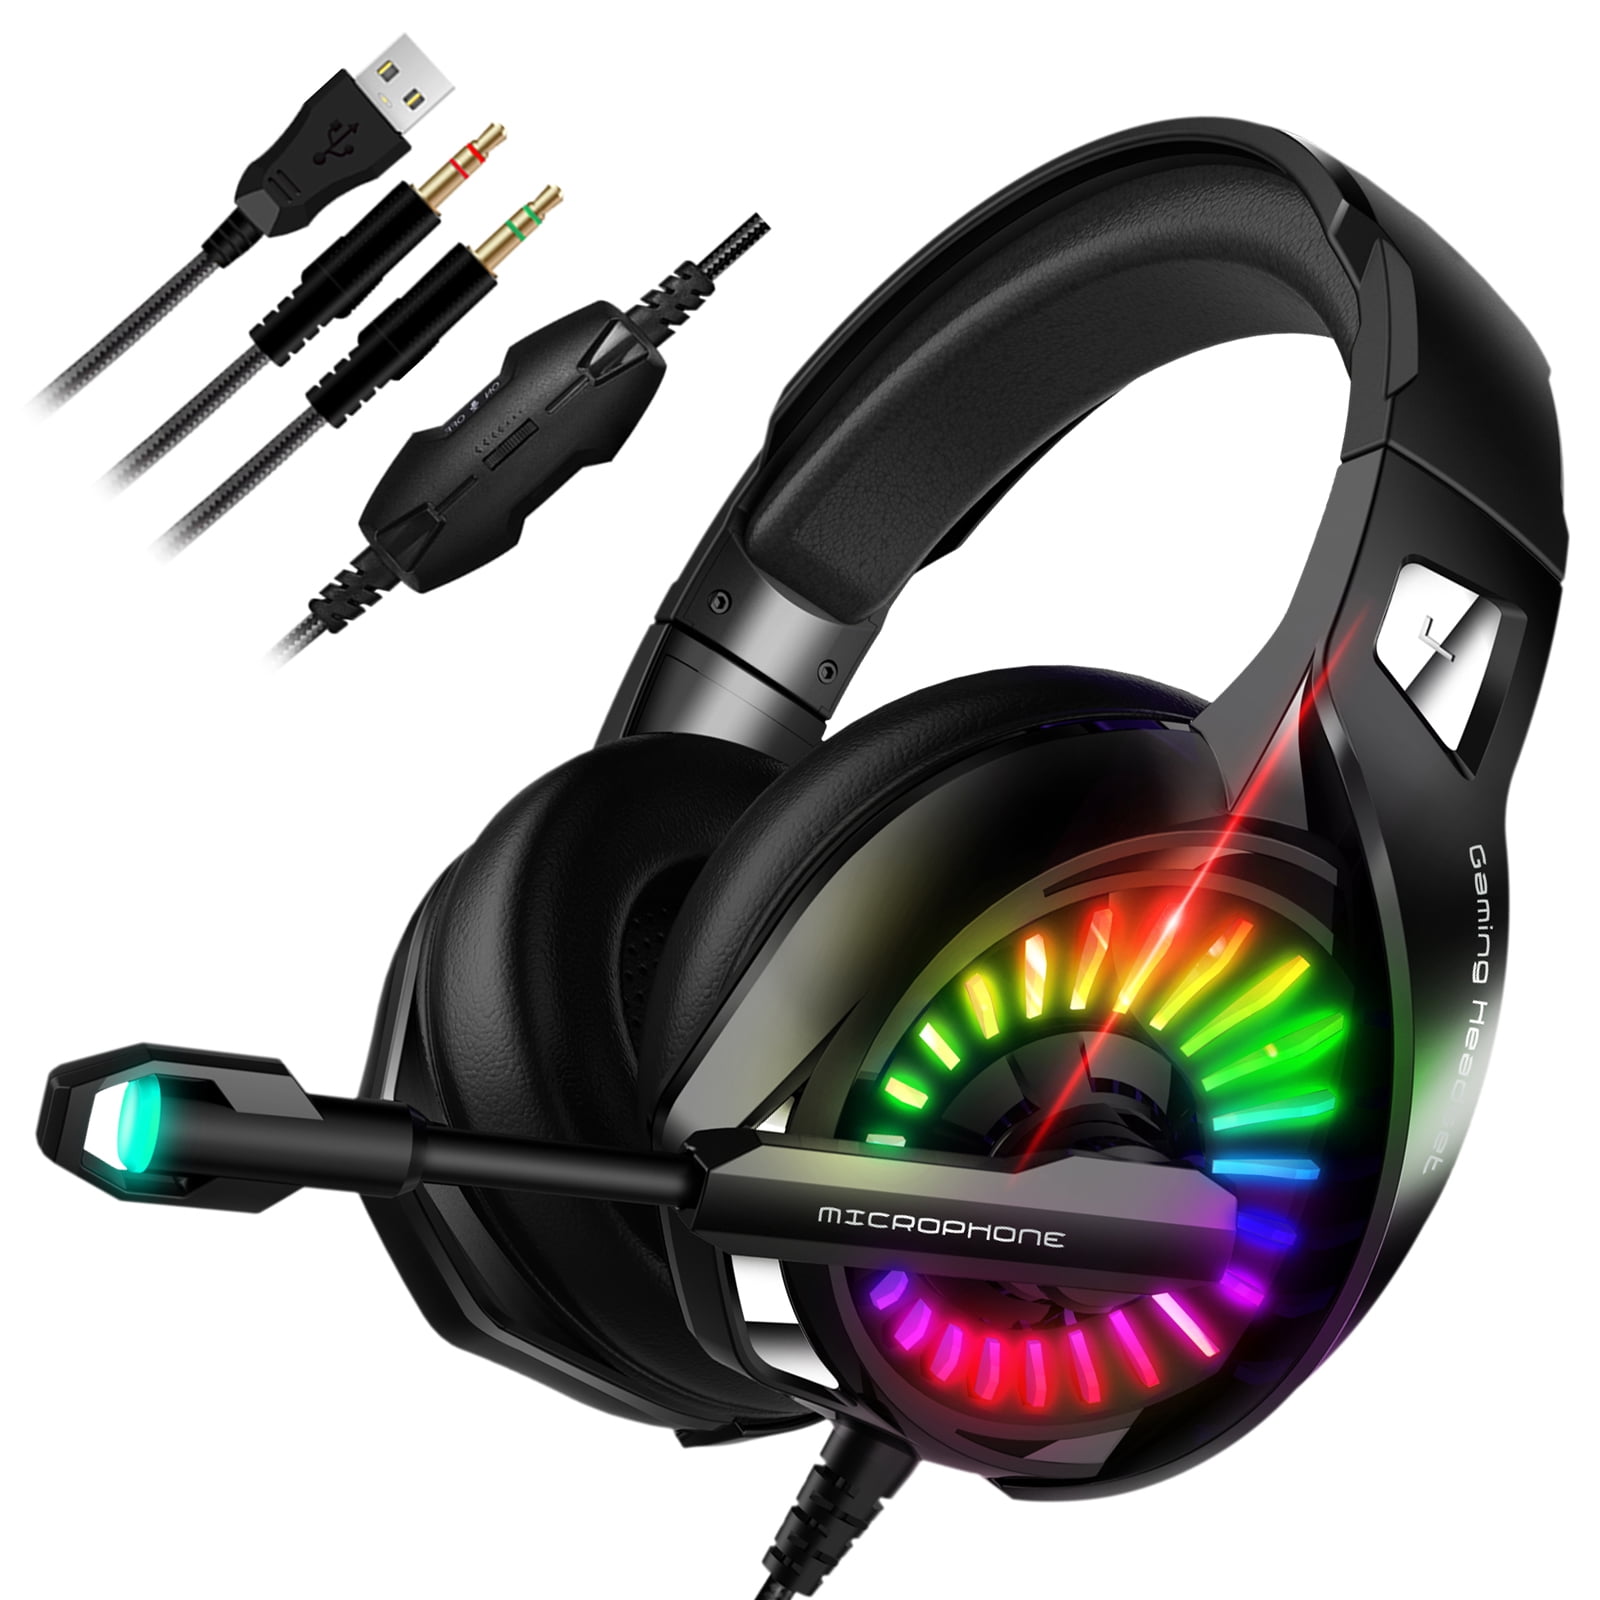 Underholde Skrivemaskine Perle TSV Gaming Headset for PC, PS4, Xbox One - 7.1 Surround Sound Headphones  Over-Ear with Noise Canceling Microphone, RGB Backlit Lights, Memory  Earmuffs, 3.5mm Wired Headset for PC, Laptop, Mobile, Mac -